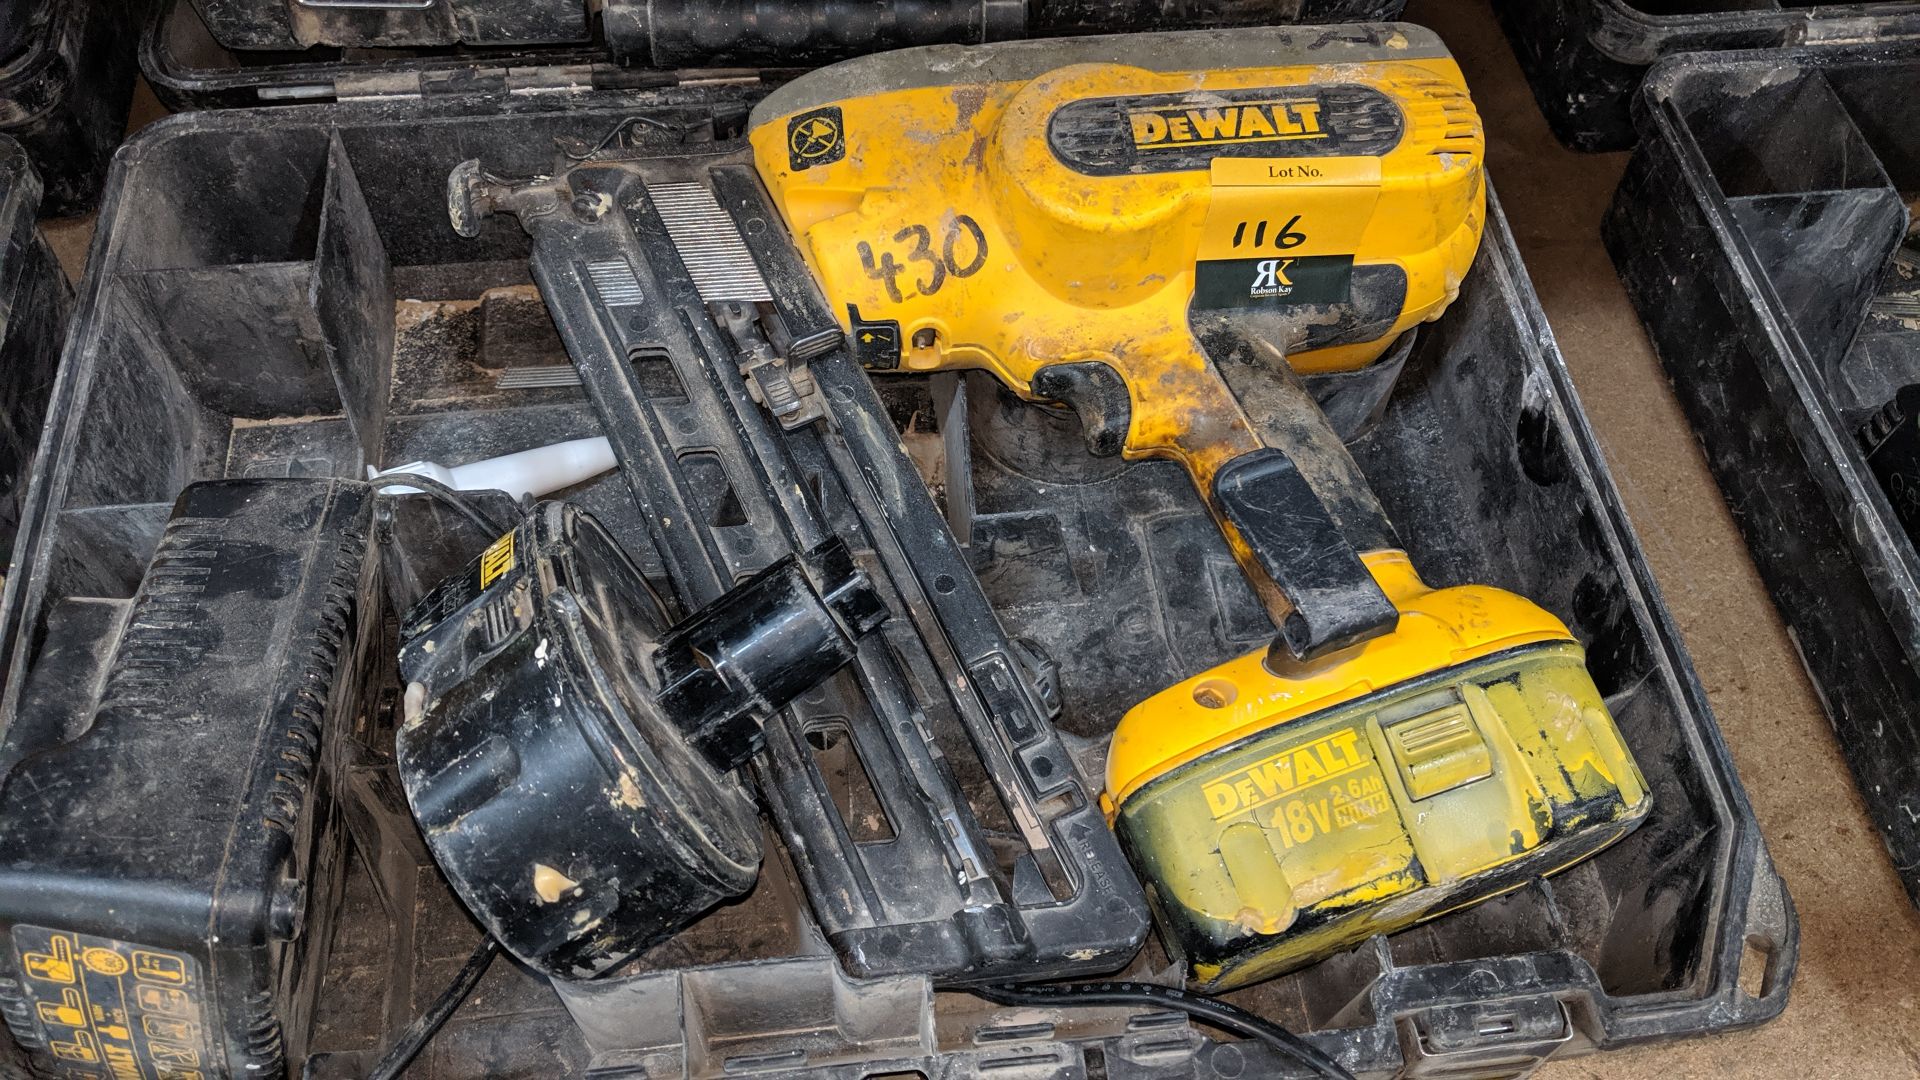 DeWalt cordless nail gun model DC618, including 2 off batteries, 1 off charger & 1 off carry case - Image 3 of 3